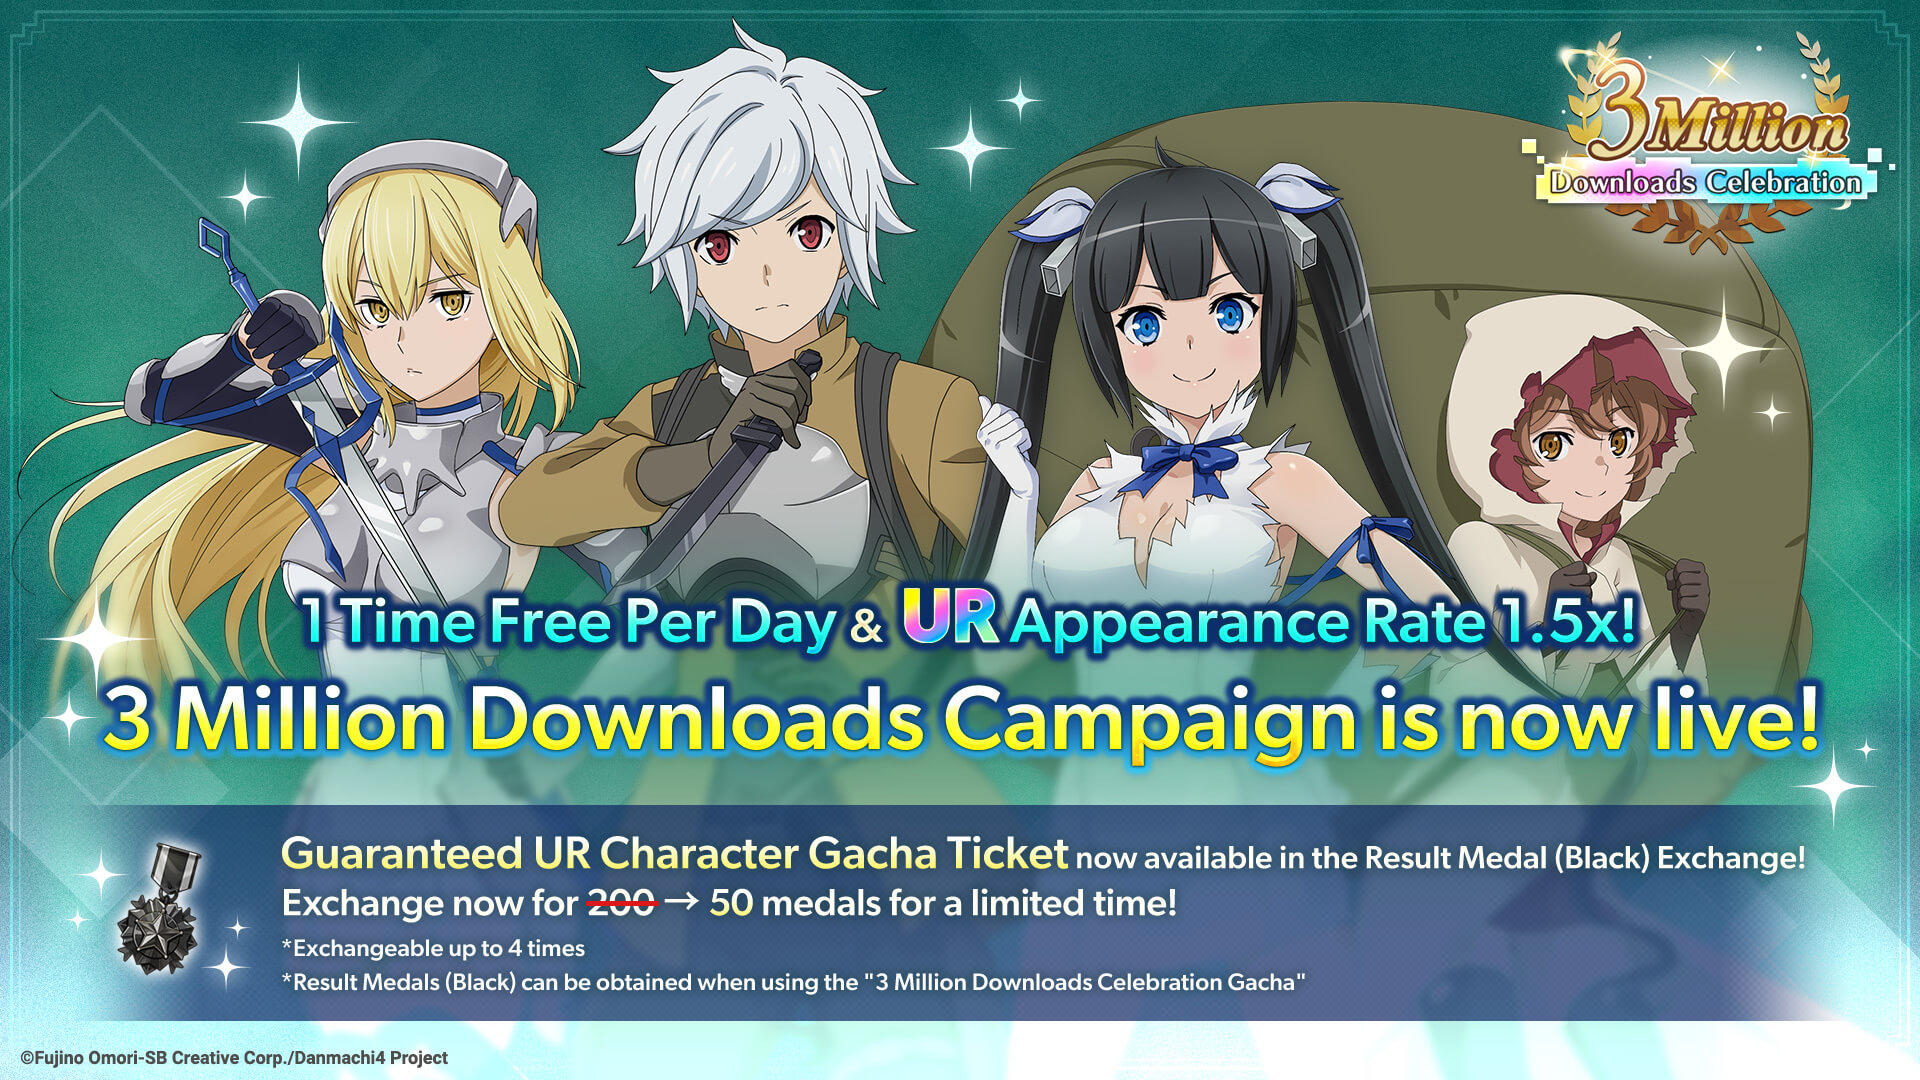 DanMachi Battle Chronicle Celebrates 500,000 Pre-Registrations with Another  Milestone - QooApp News